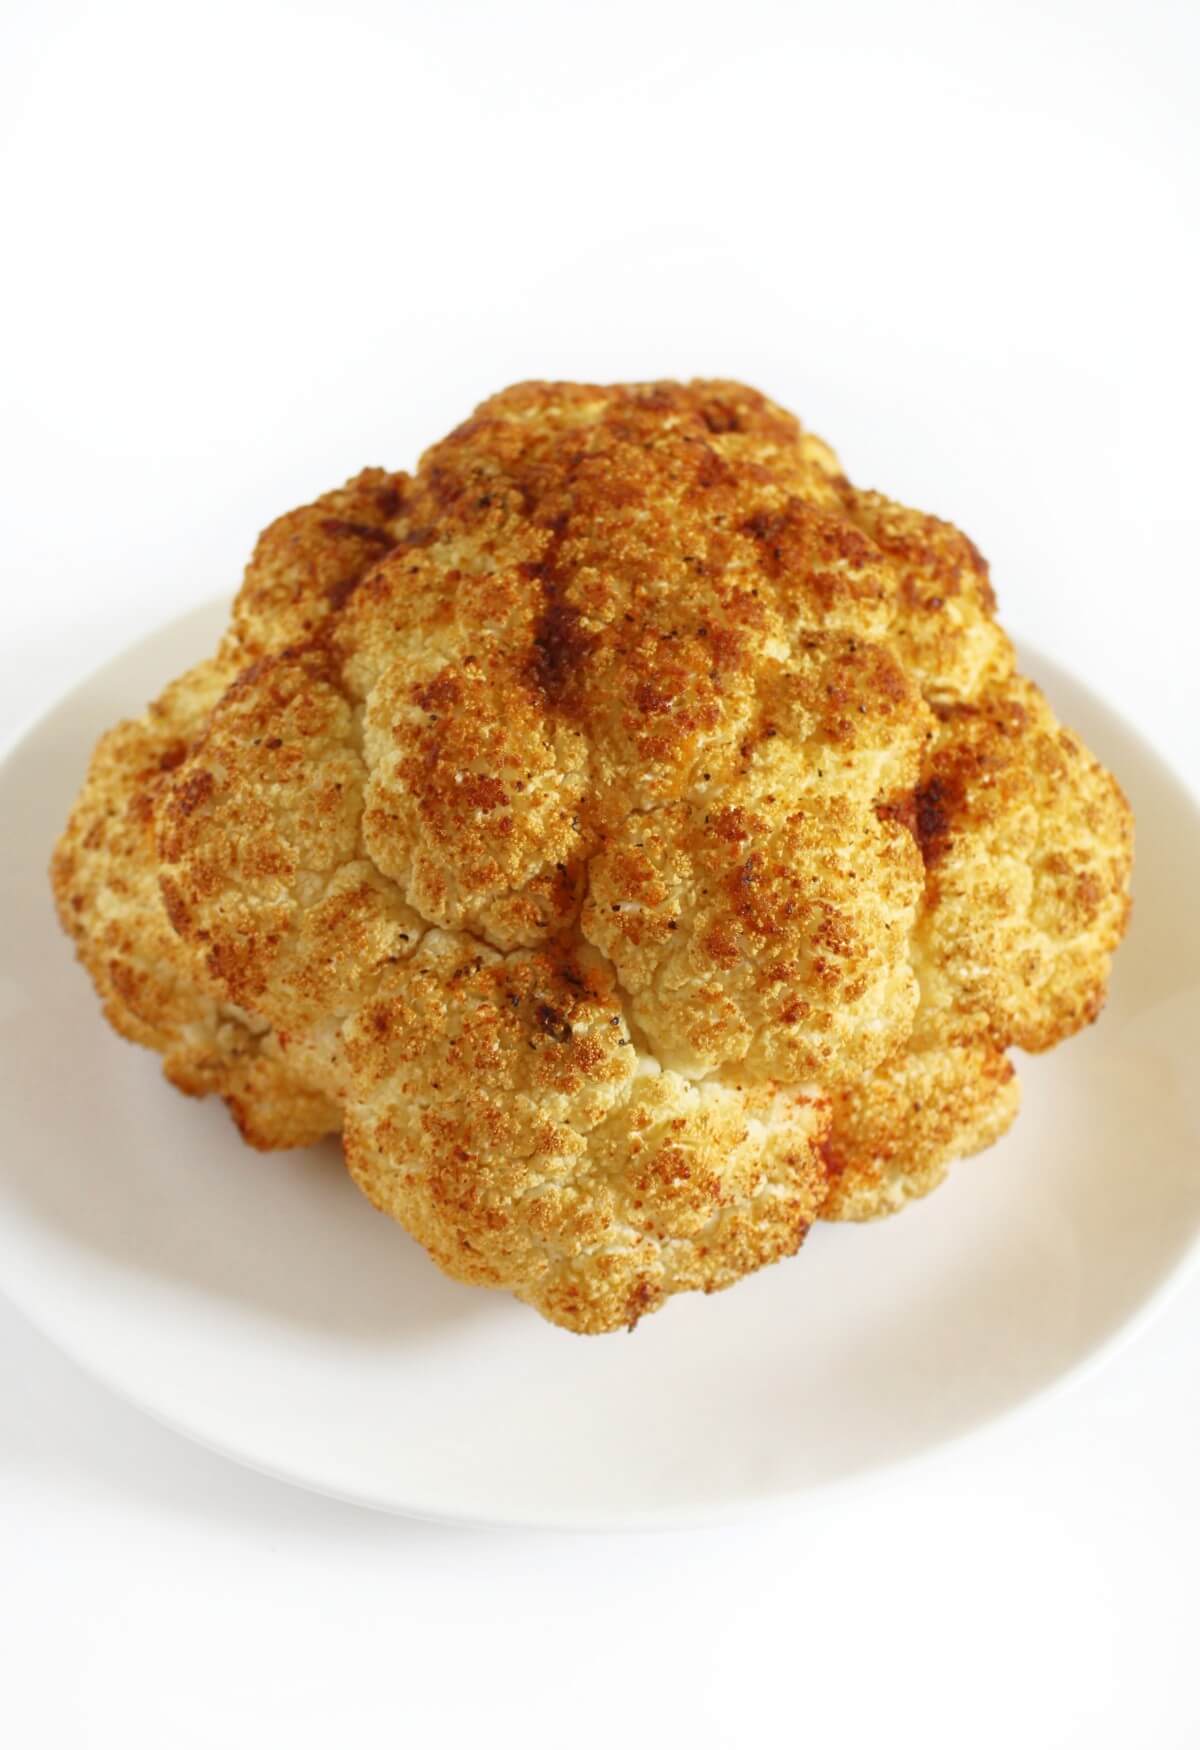 front of whole roasted cauliflower on white serving plate.